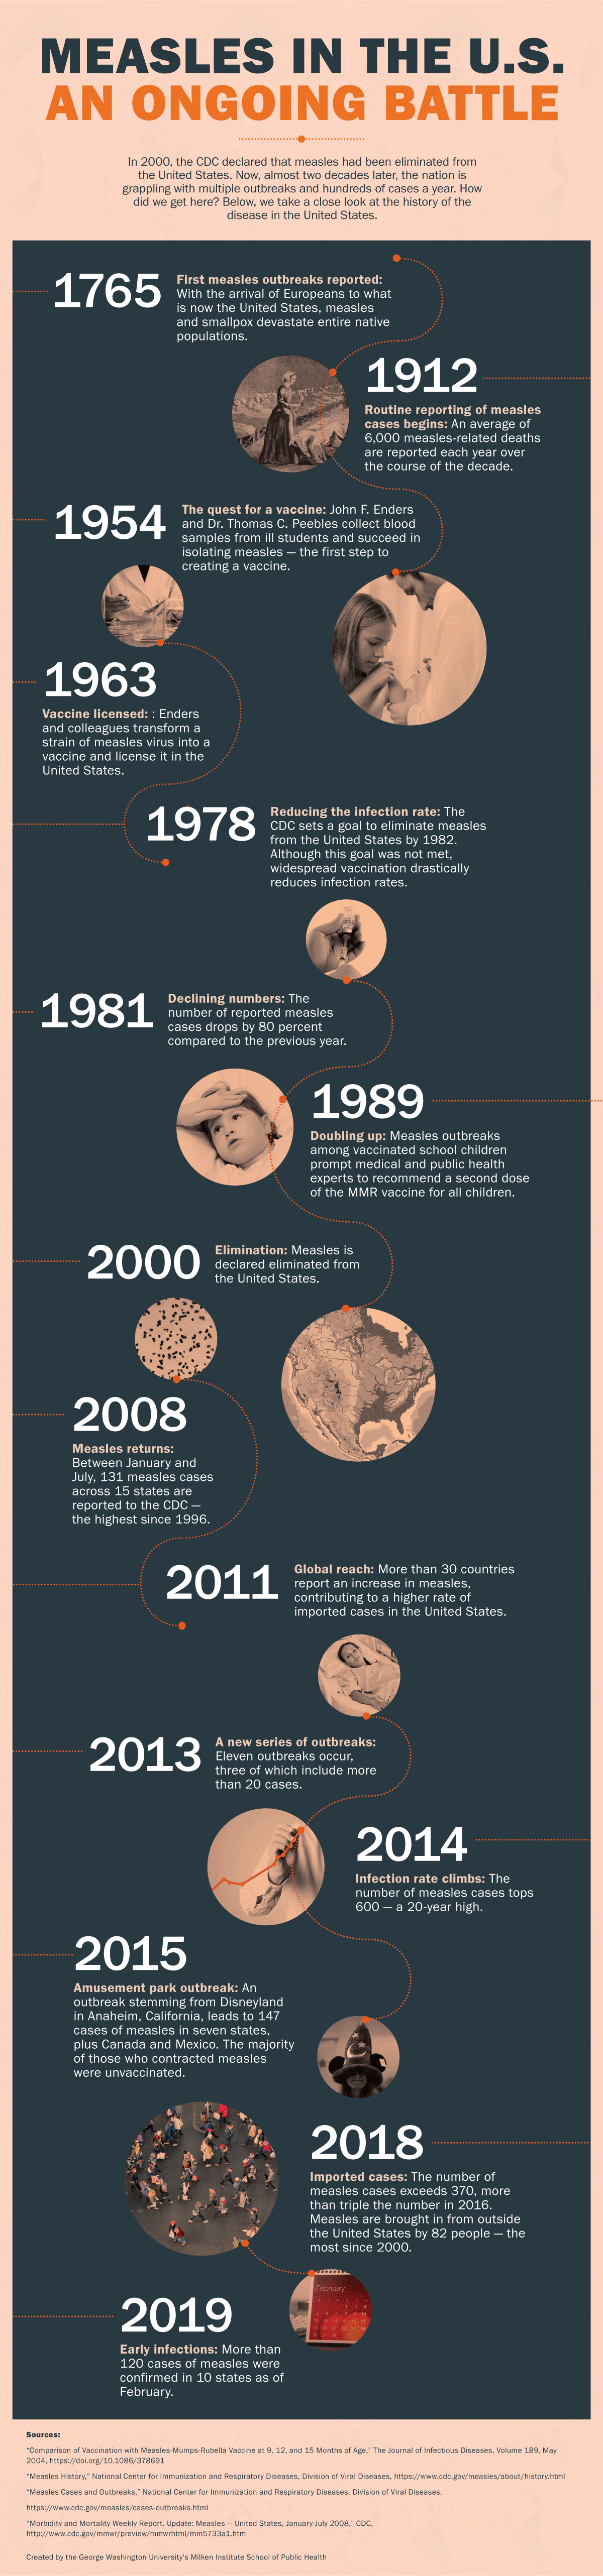 A History of Measles in the United States Online Public Health